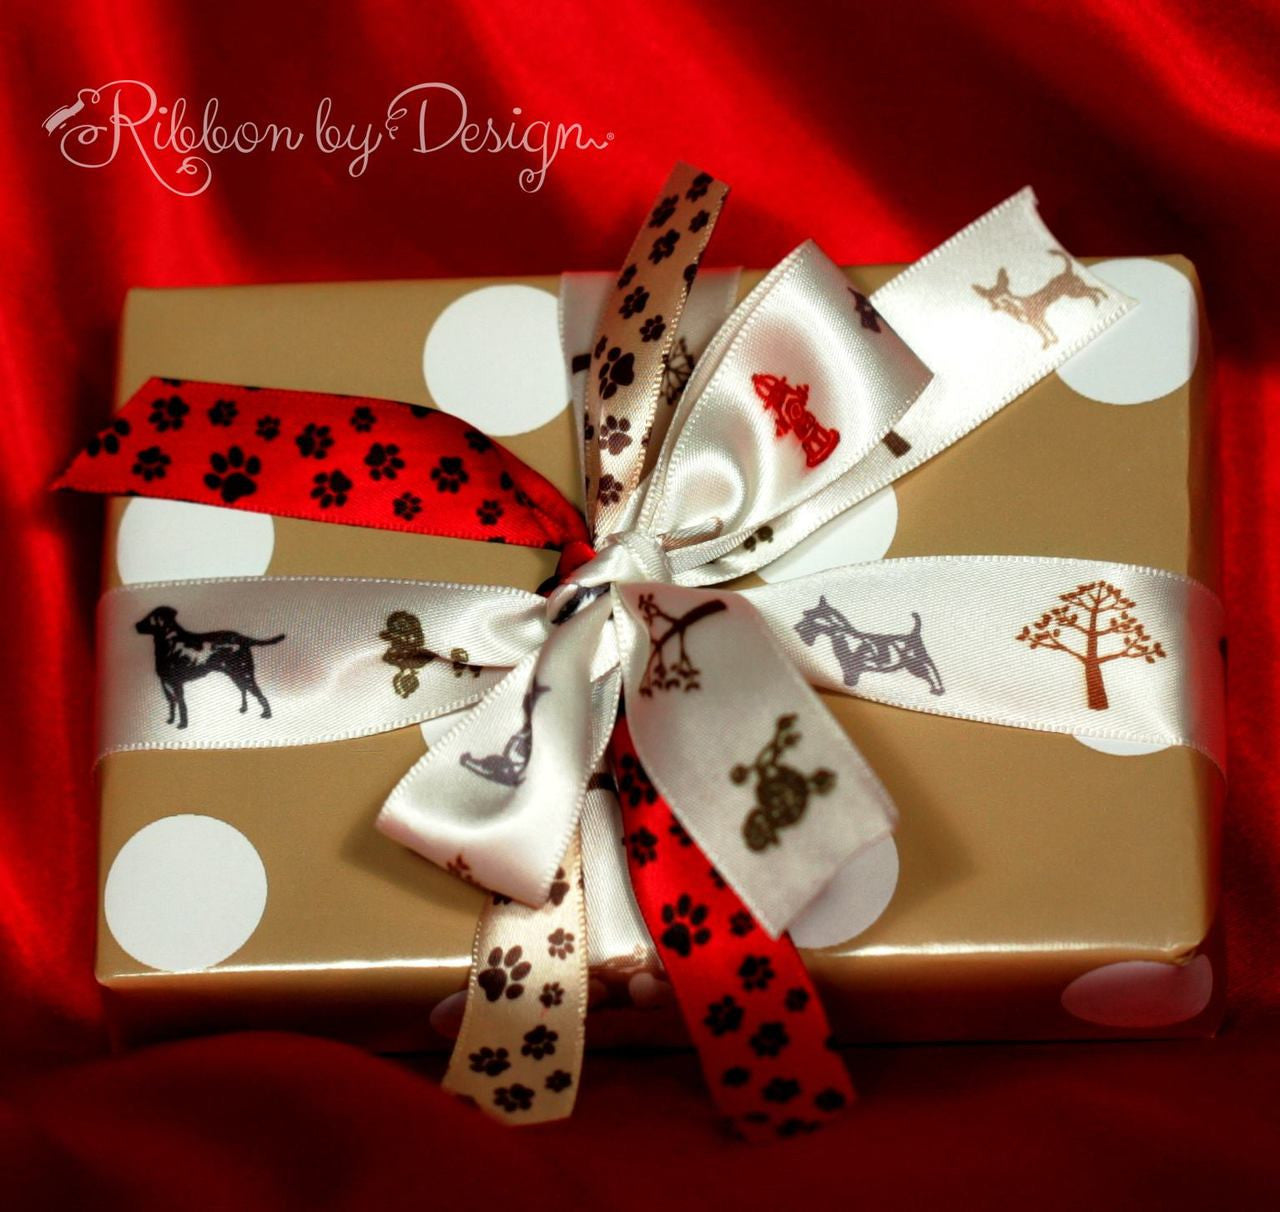 Our ribbon mix or Paw Prints and Dogs on Parade work so well together to make the perfect pet present!